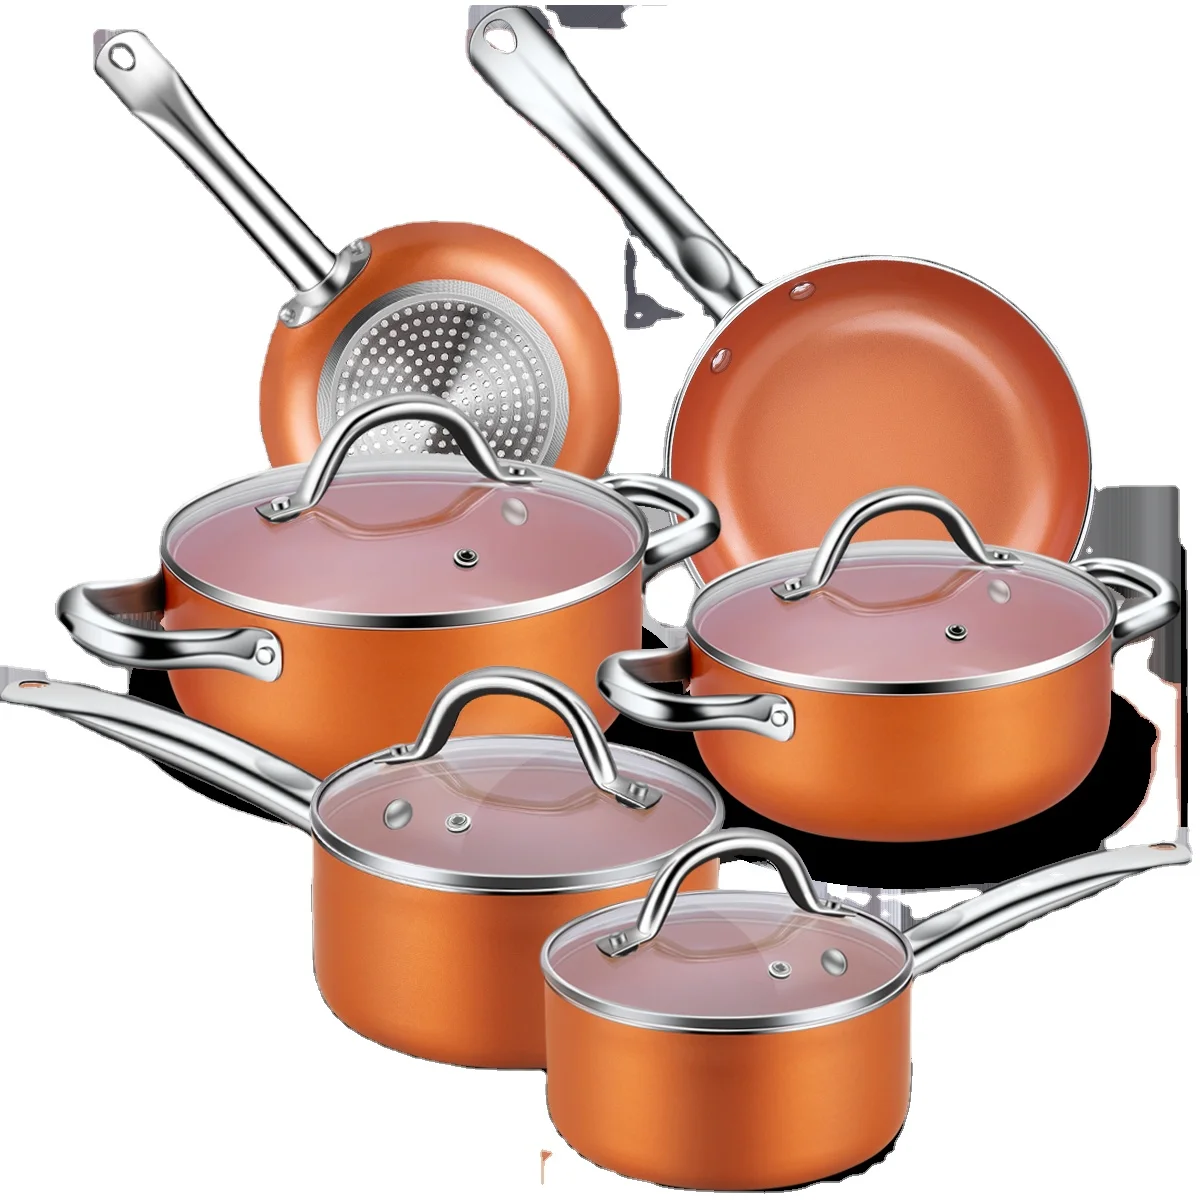 

High quality 2-in-1 eco-friendly kitchen cooking pot nonstick cookware sets, Orange